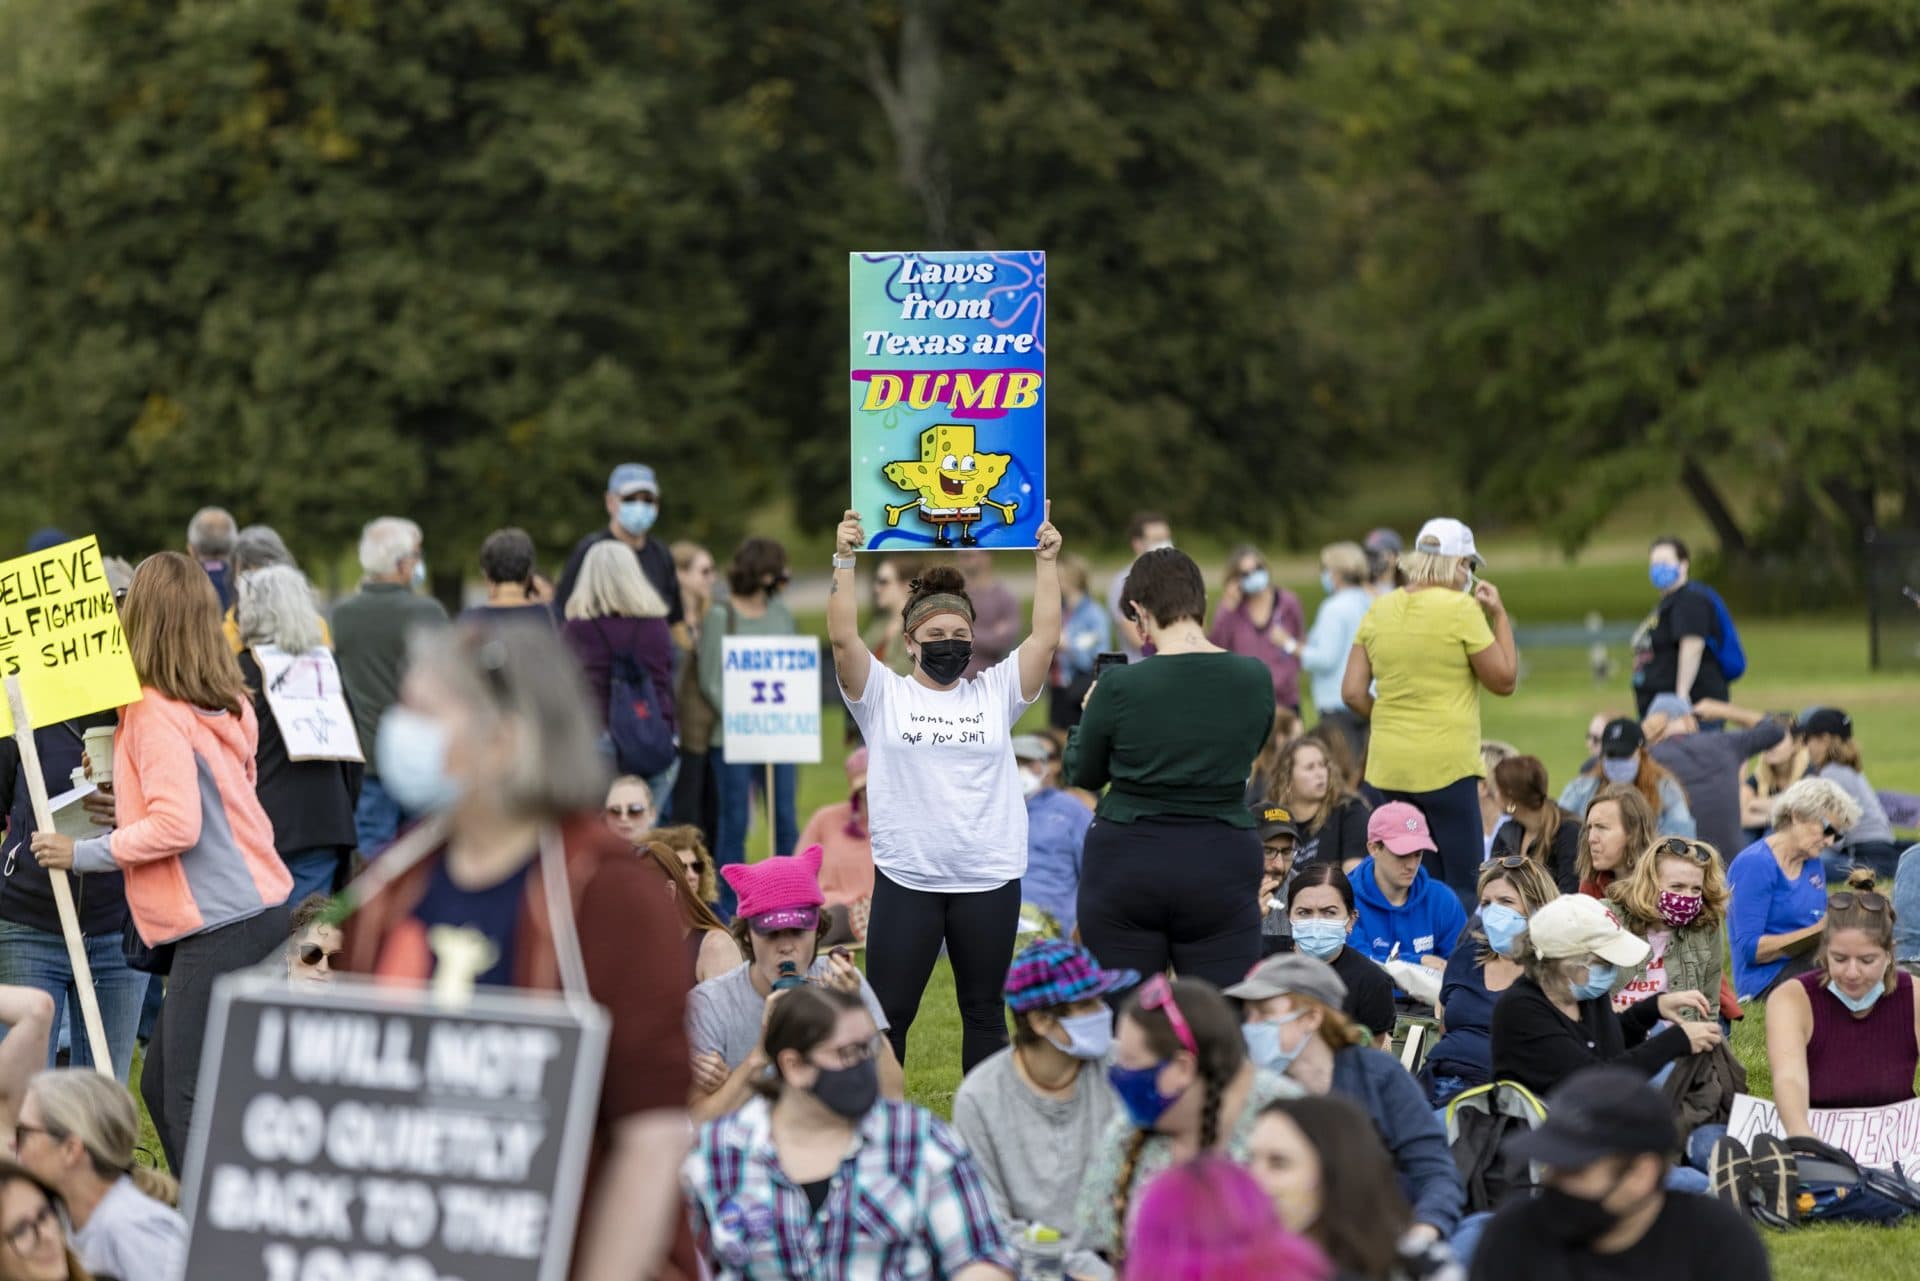 At least 1,000 people gathered at the Franklin Park Playstead Saturday. (Jesse Costa/WBUR)